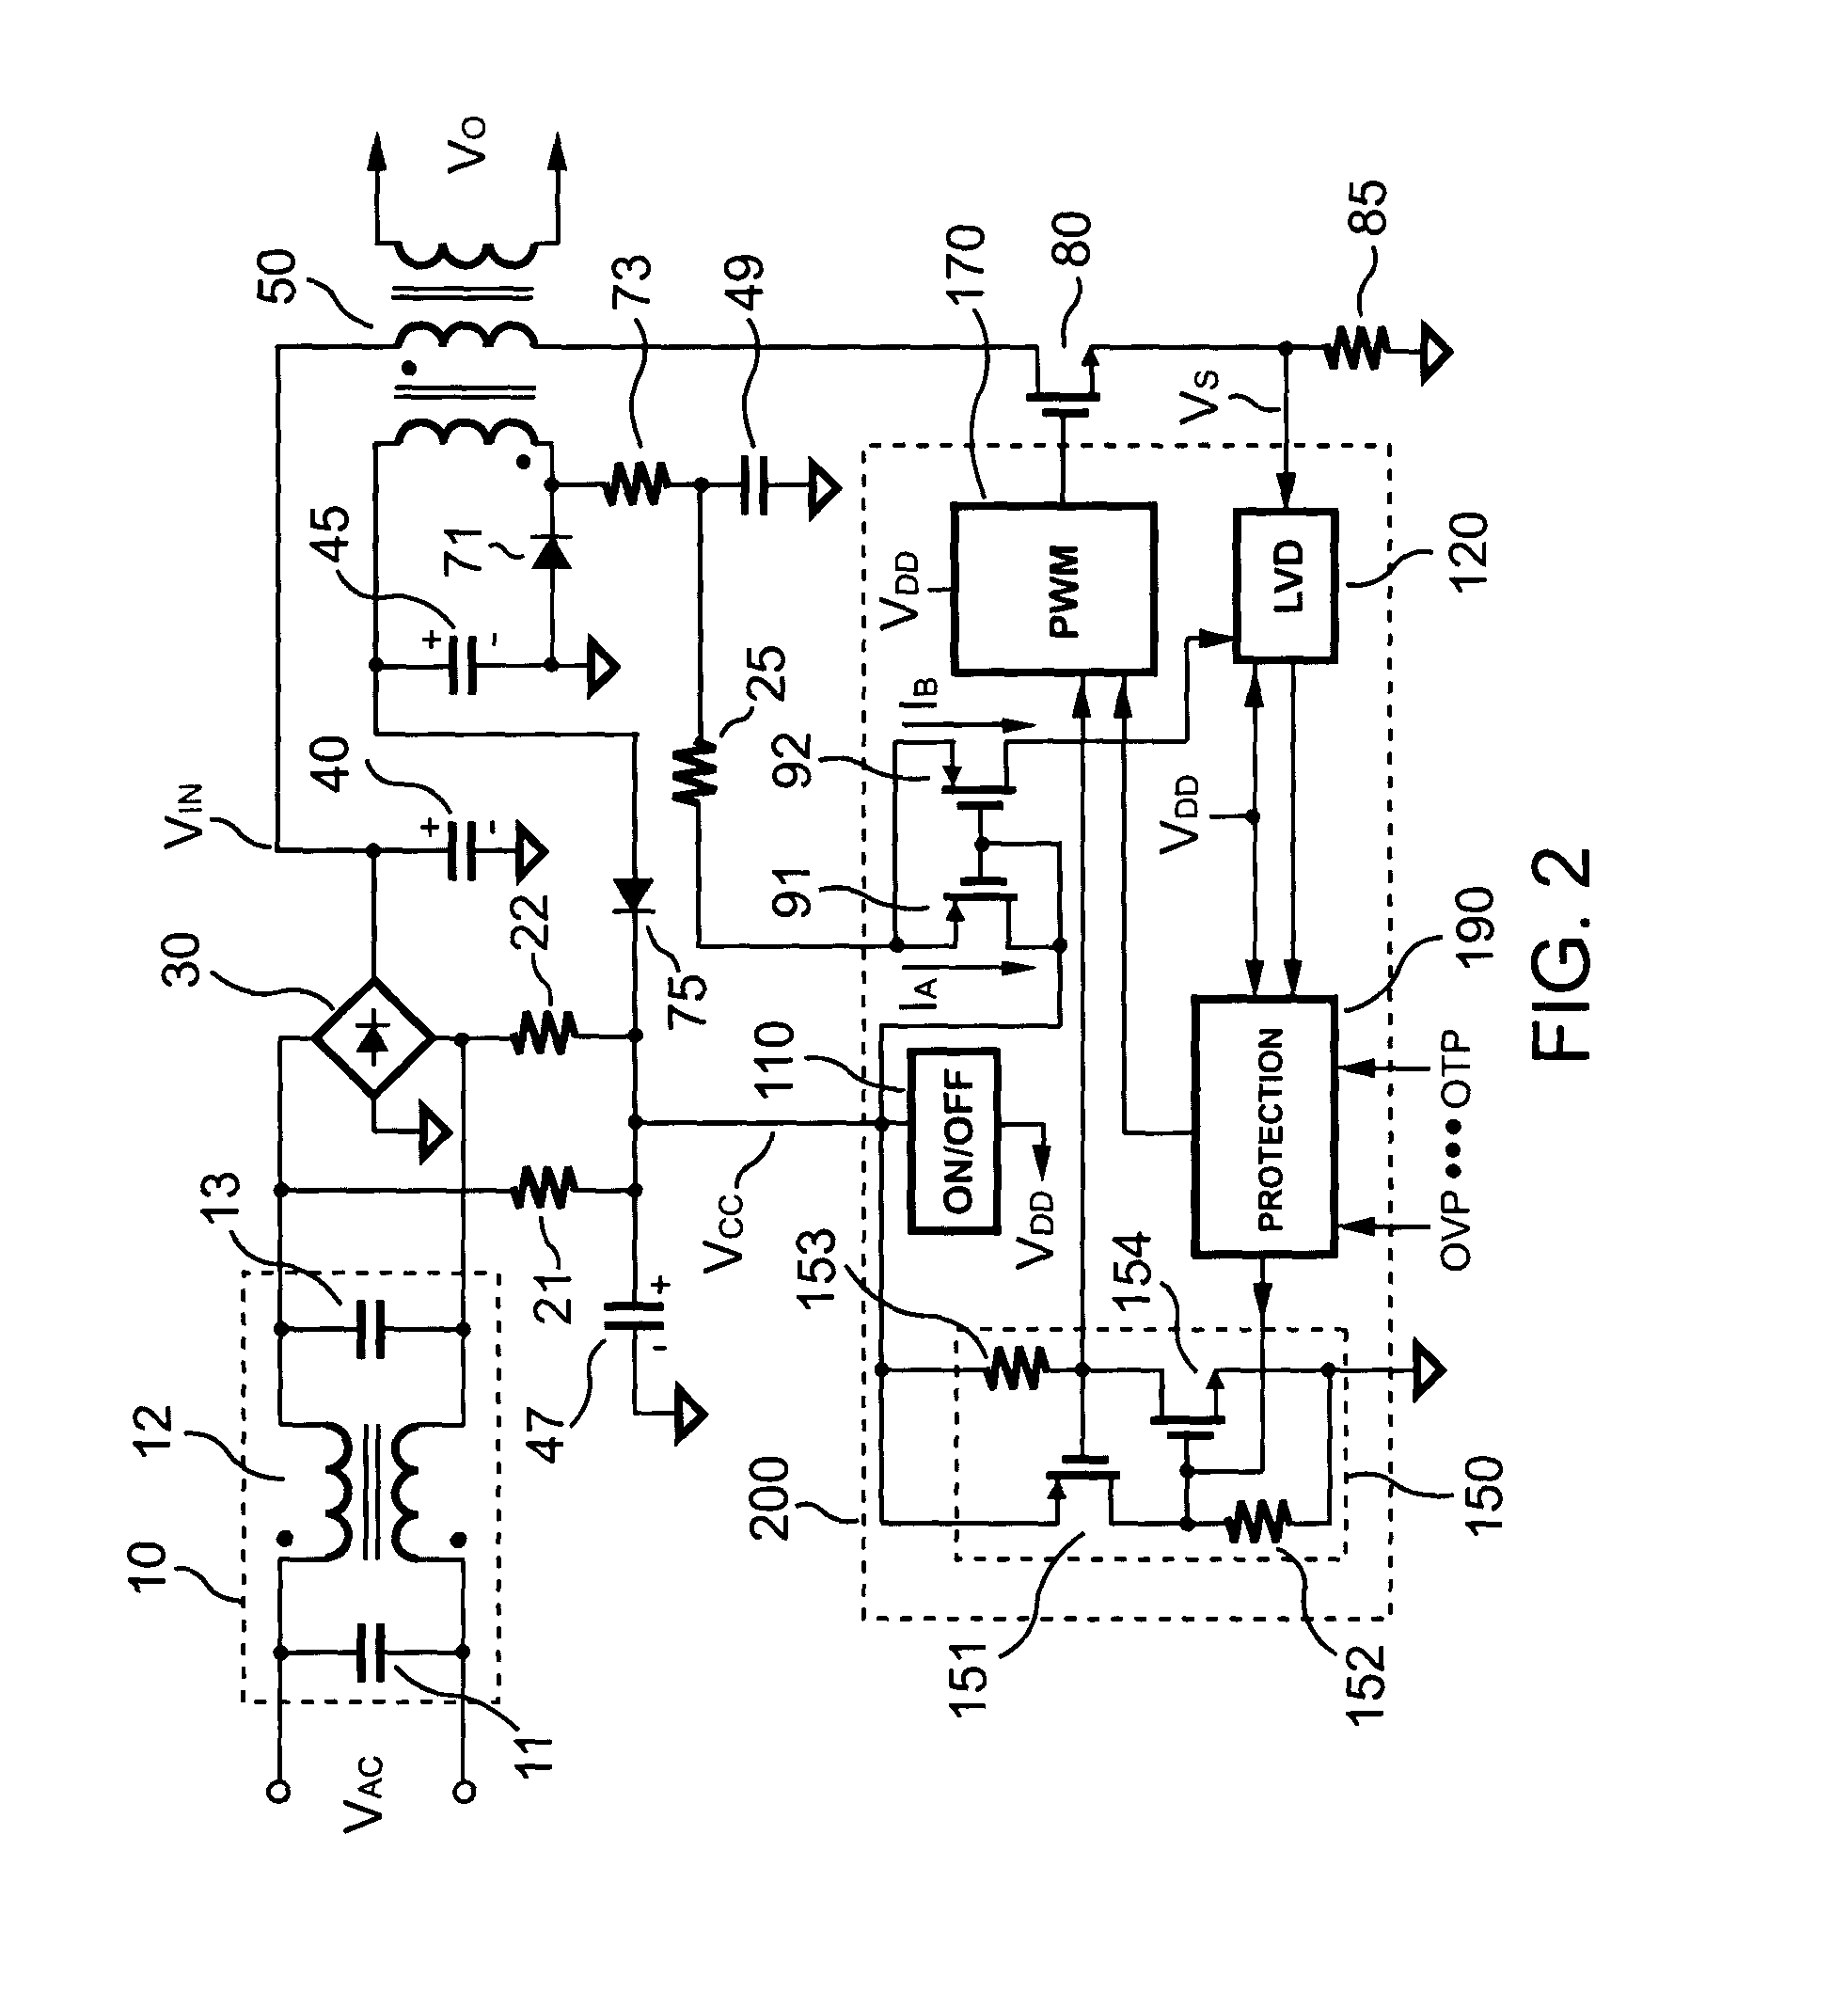 Integrated start-up circuit with reduced power consumption